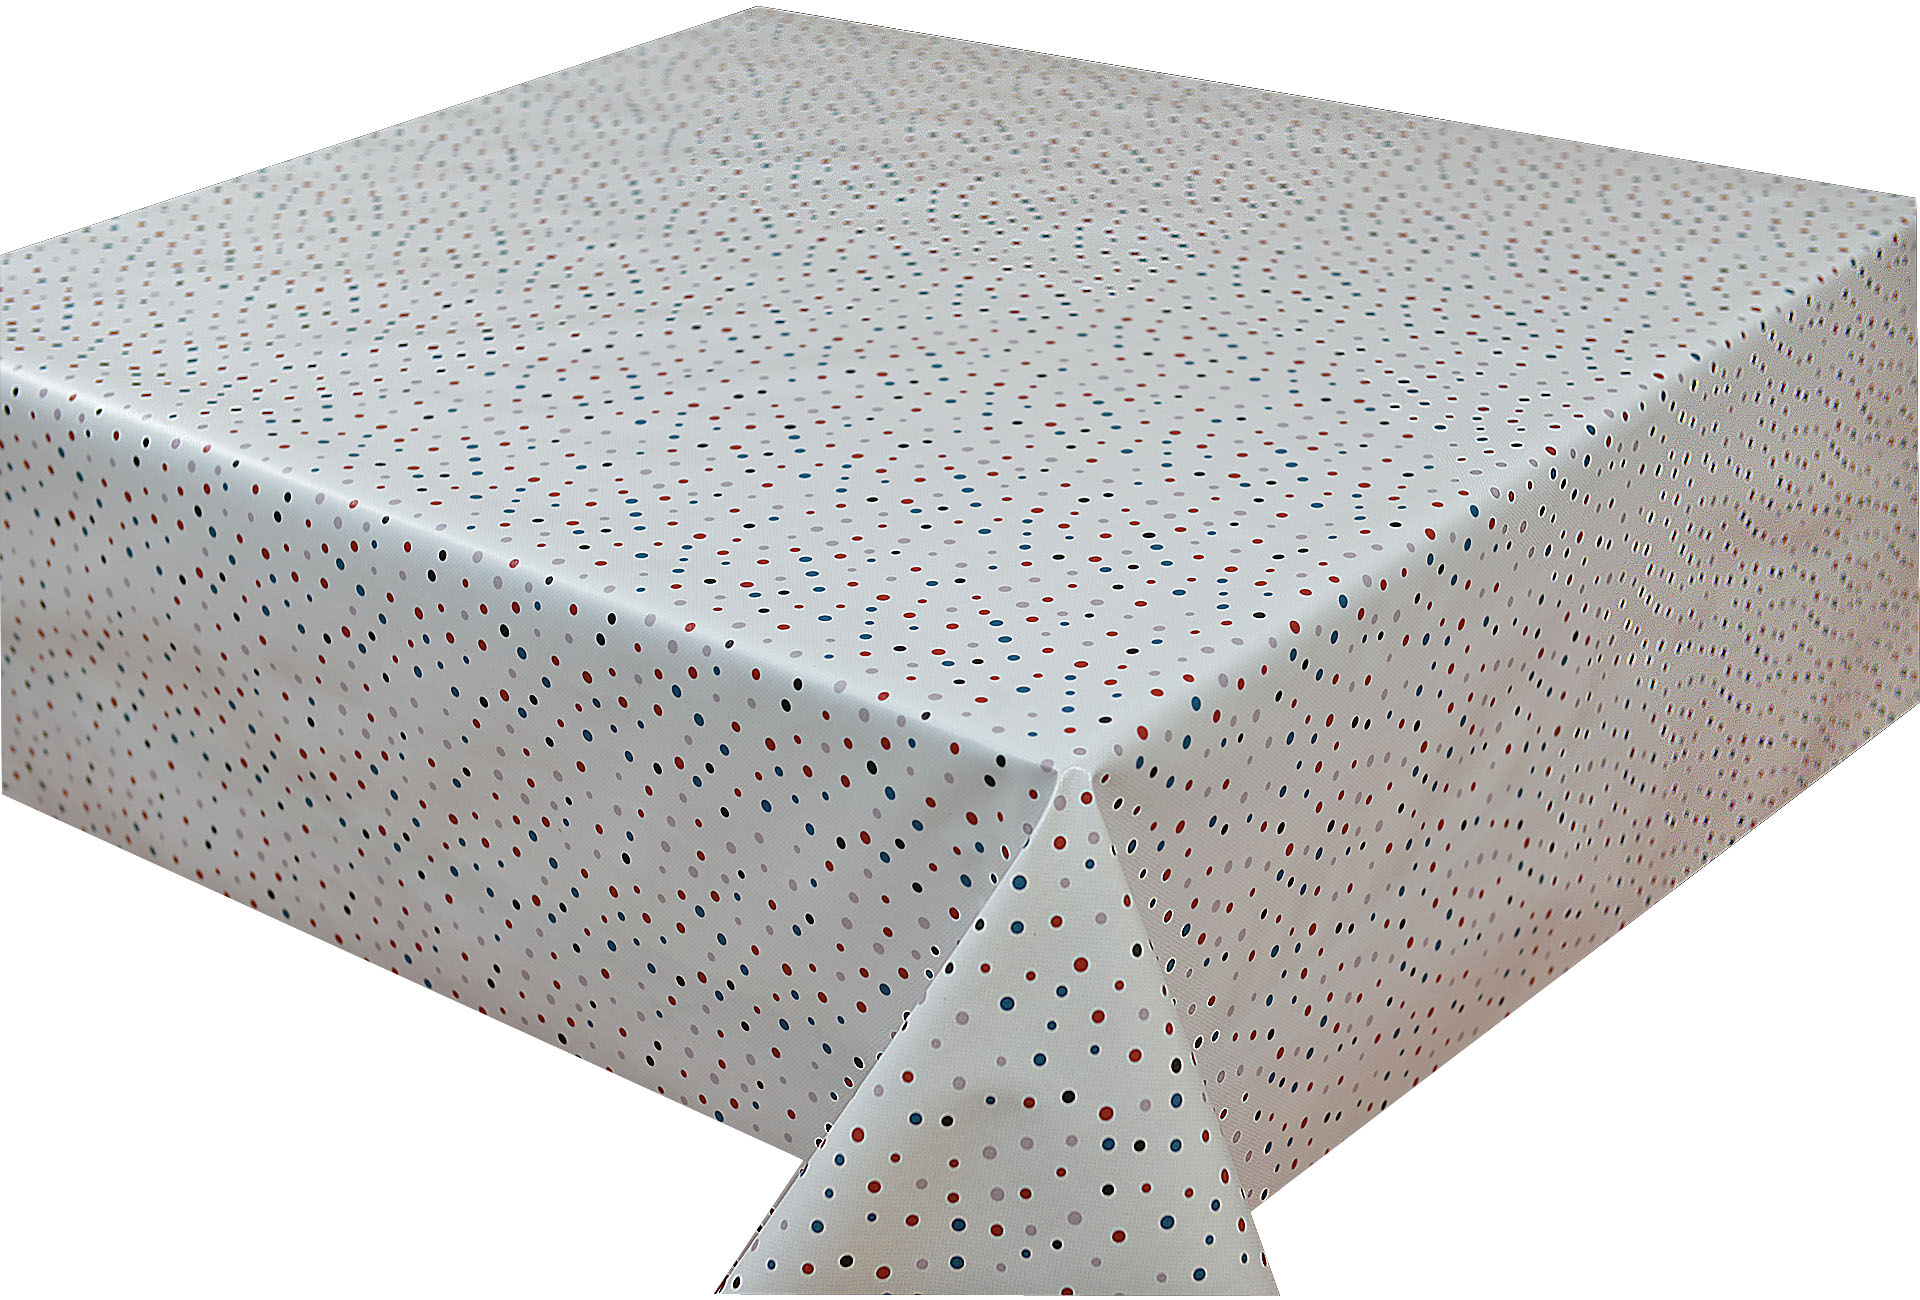 Table Cover - Printed Table Cover - Europe Design Table Cover - BS-EN8062